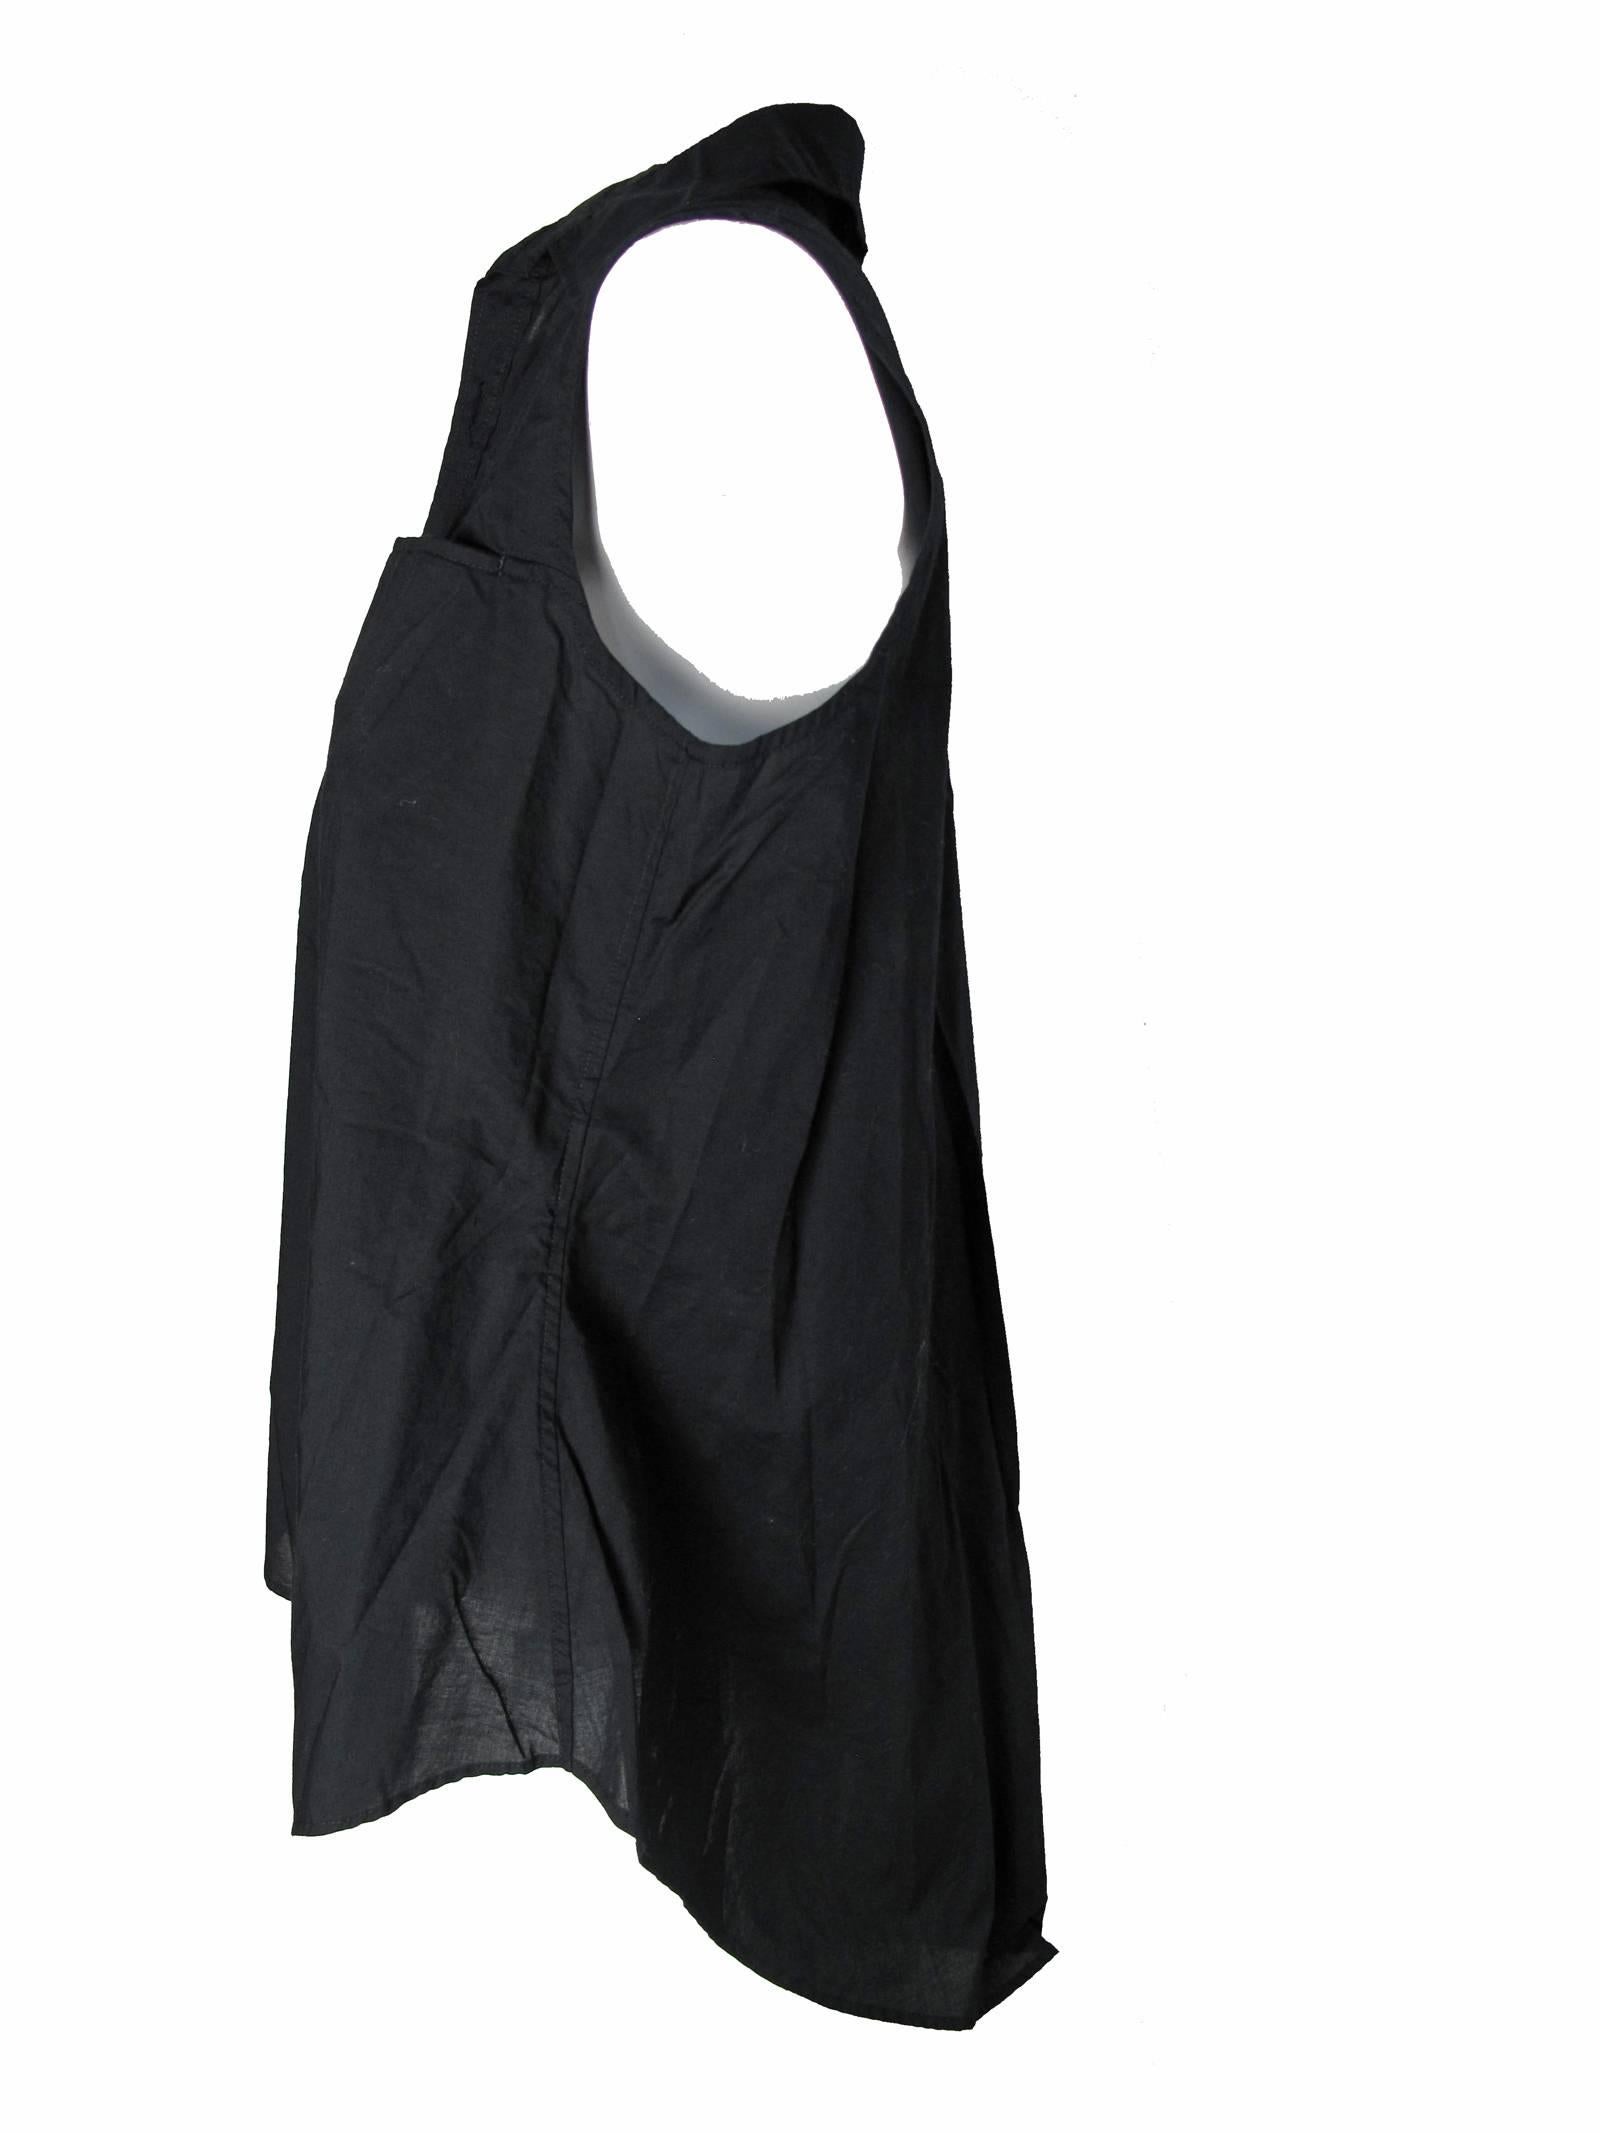 Y's black cotton sleeveless button down shirt with two front pockets and longer tail in back.  Condition: Very good.  Size 3
41